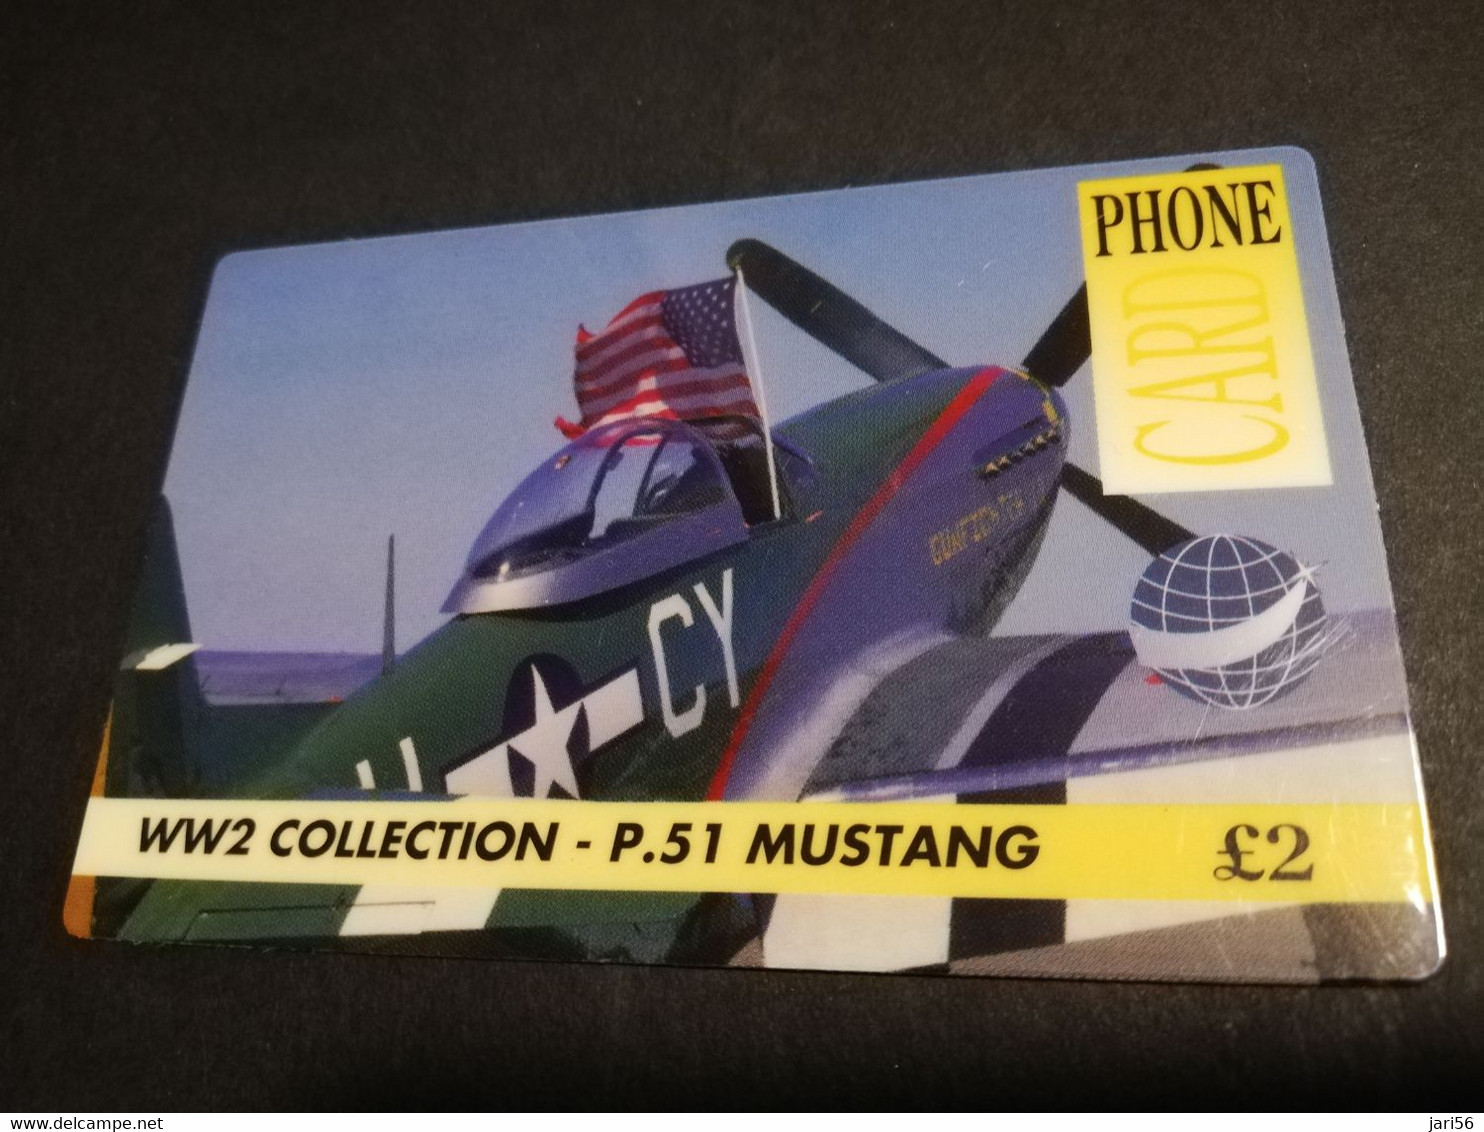 GREAT BRITAIN   3 POUND  AIR PLANES  P-51 MUSTANG   DIT PHONECARD    PREPAID CARD      **5918** - Collections